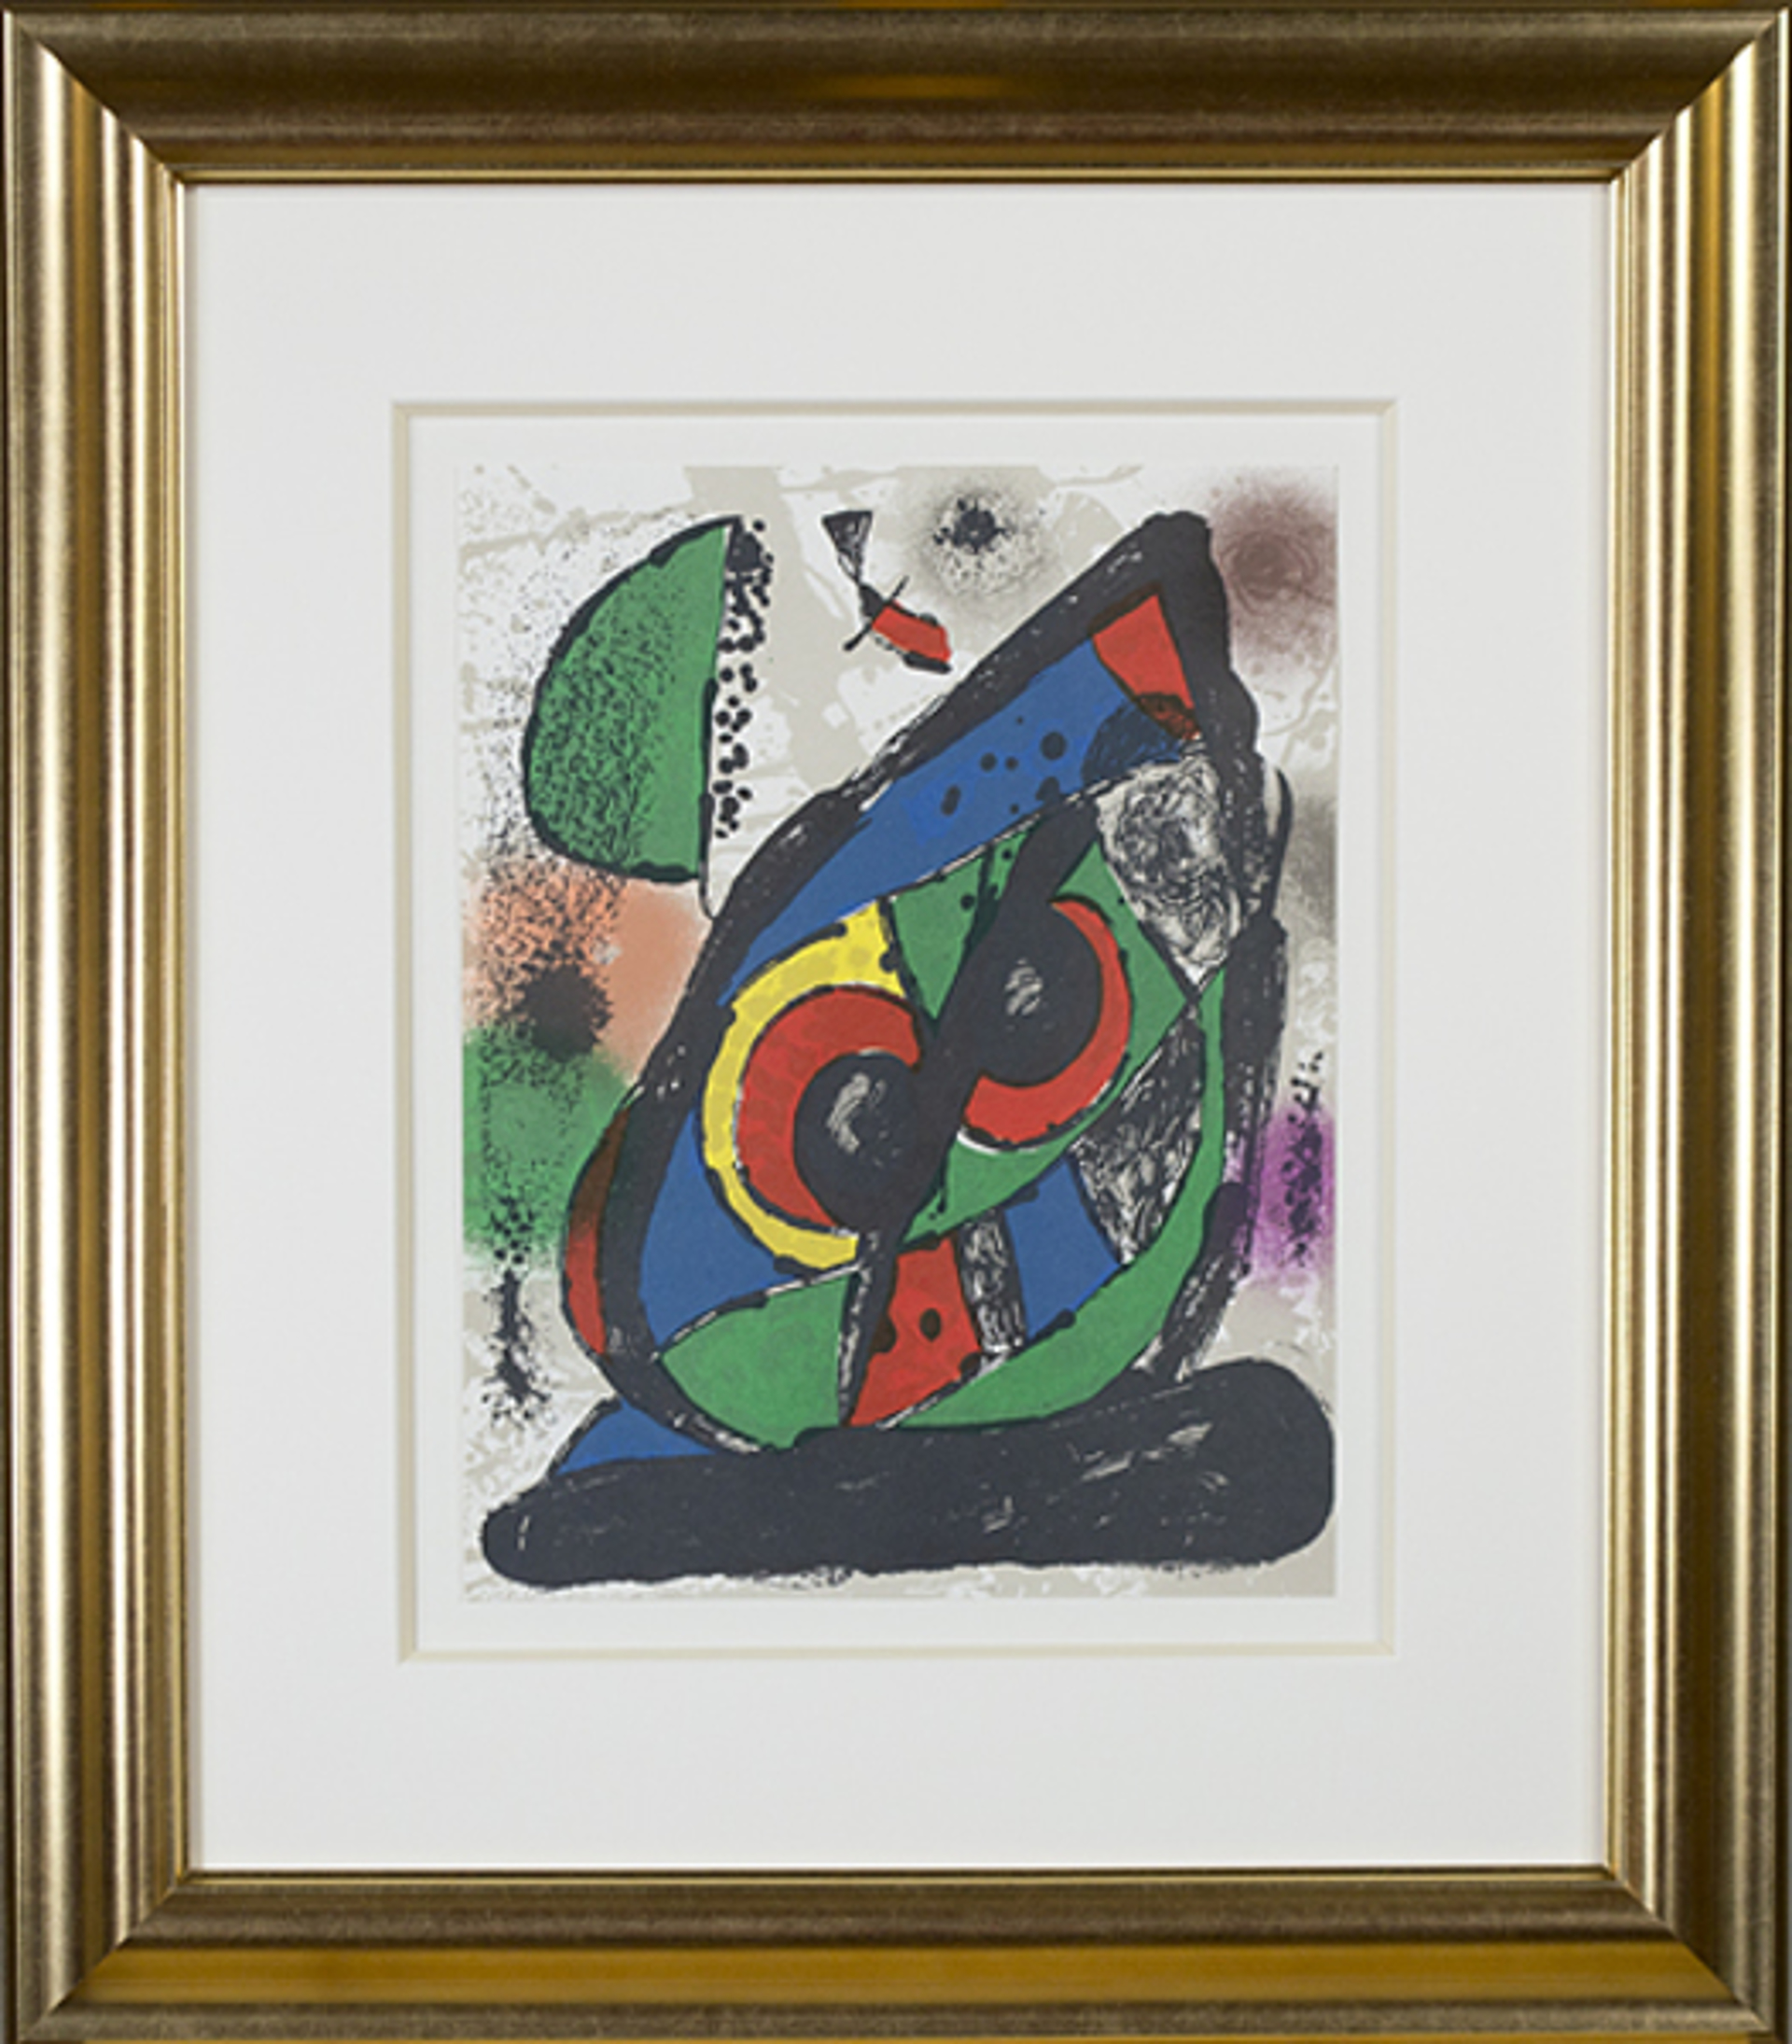 Lithographie Originale I from "Miro Lithographs IV, Maeght Publisher" by Joan Miró